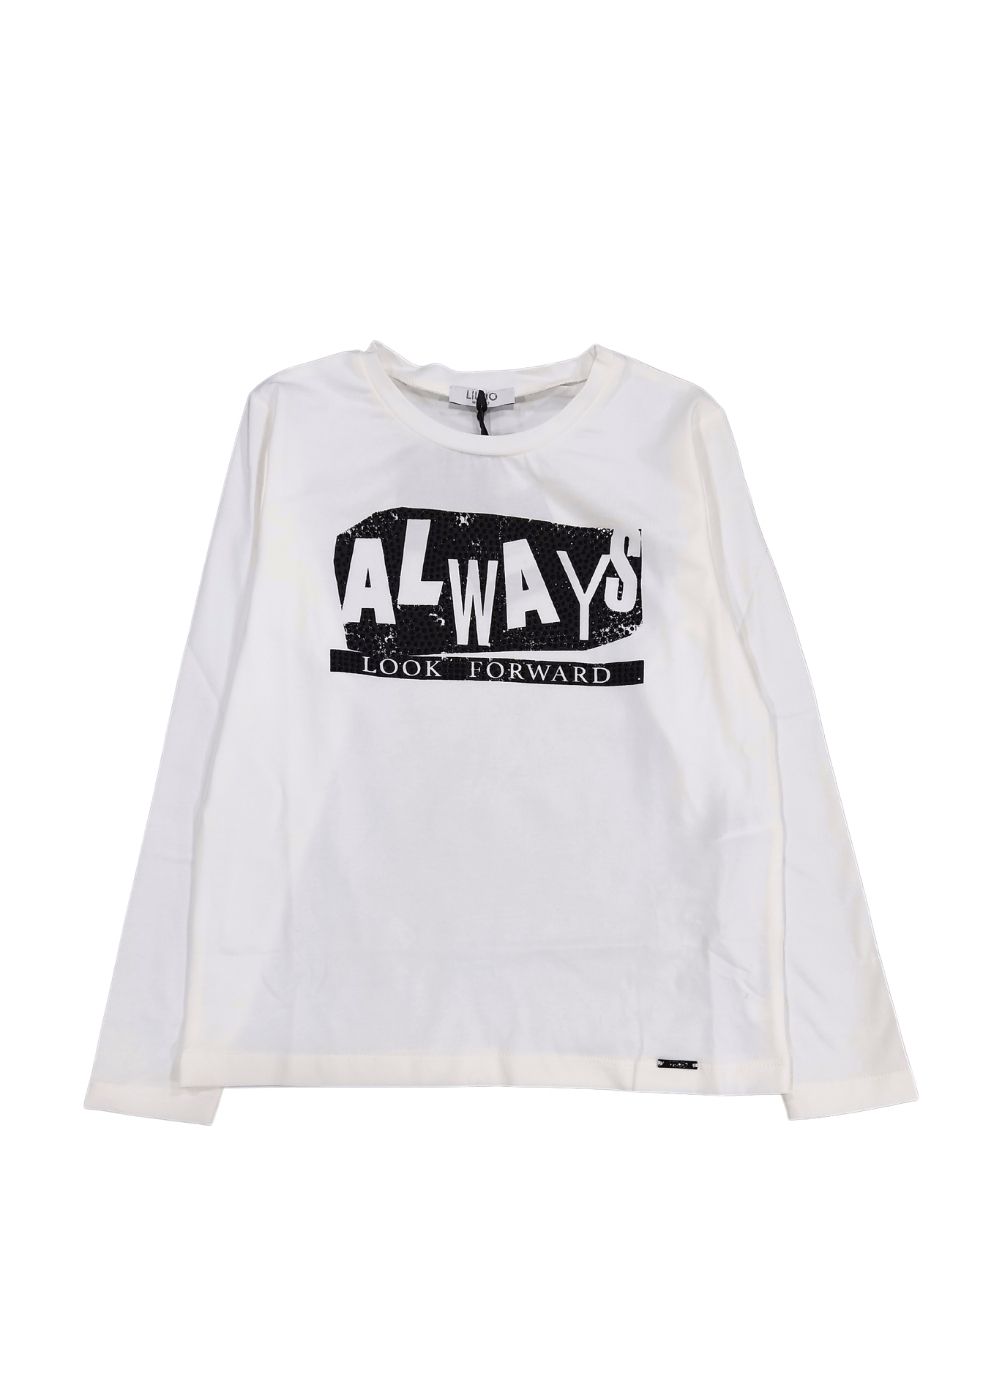 Featured image for “LIU JO T-SHIRT "ALWAYS"”